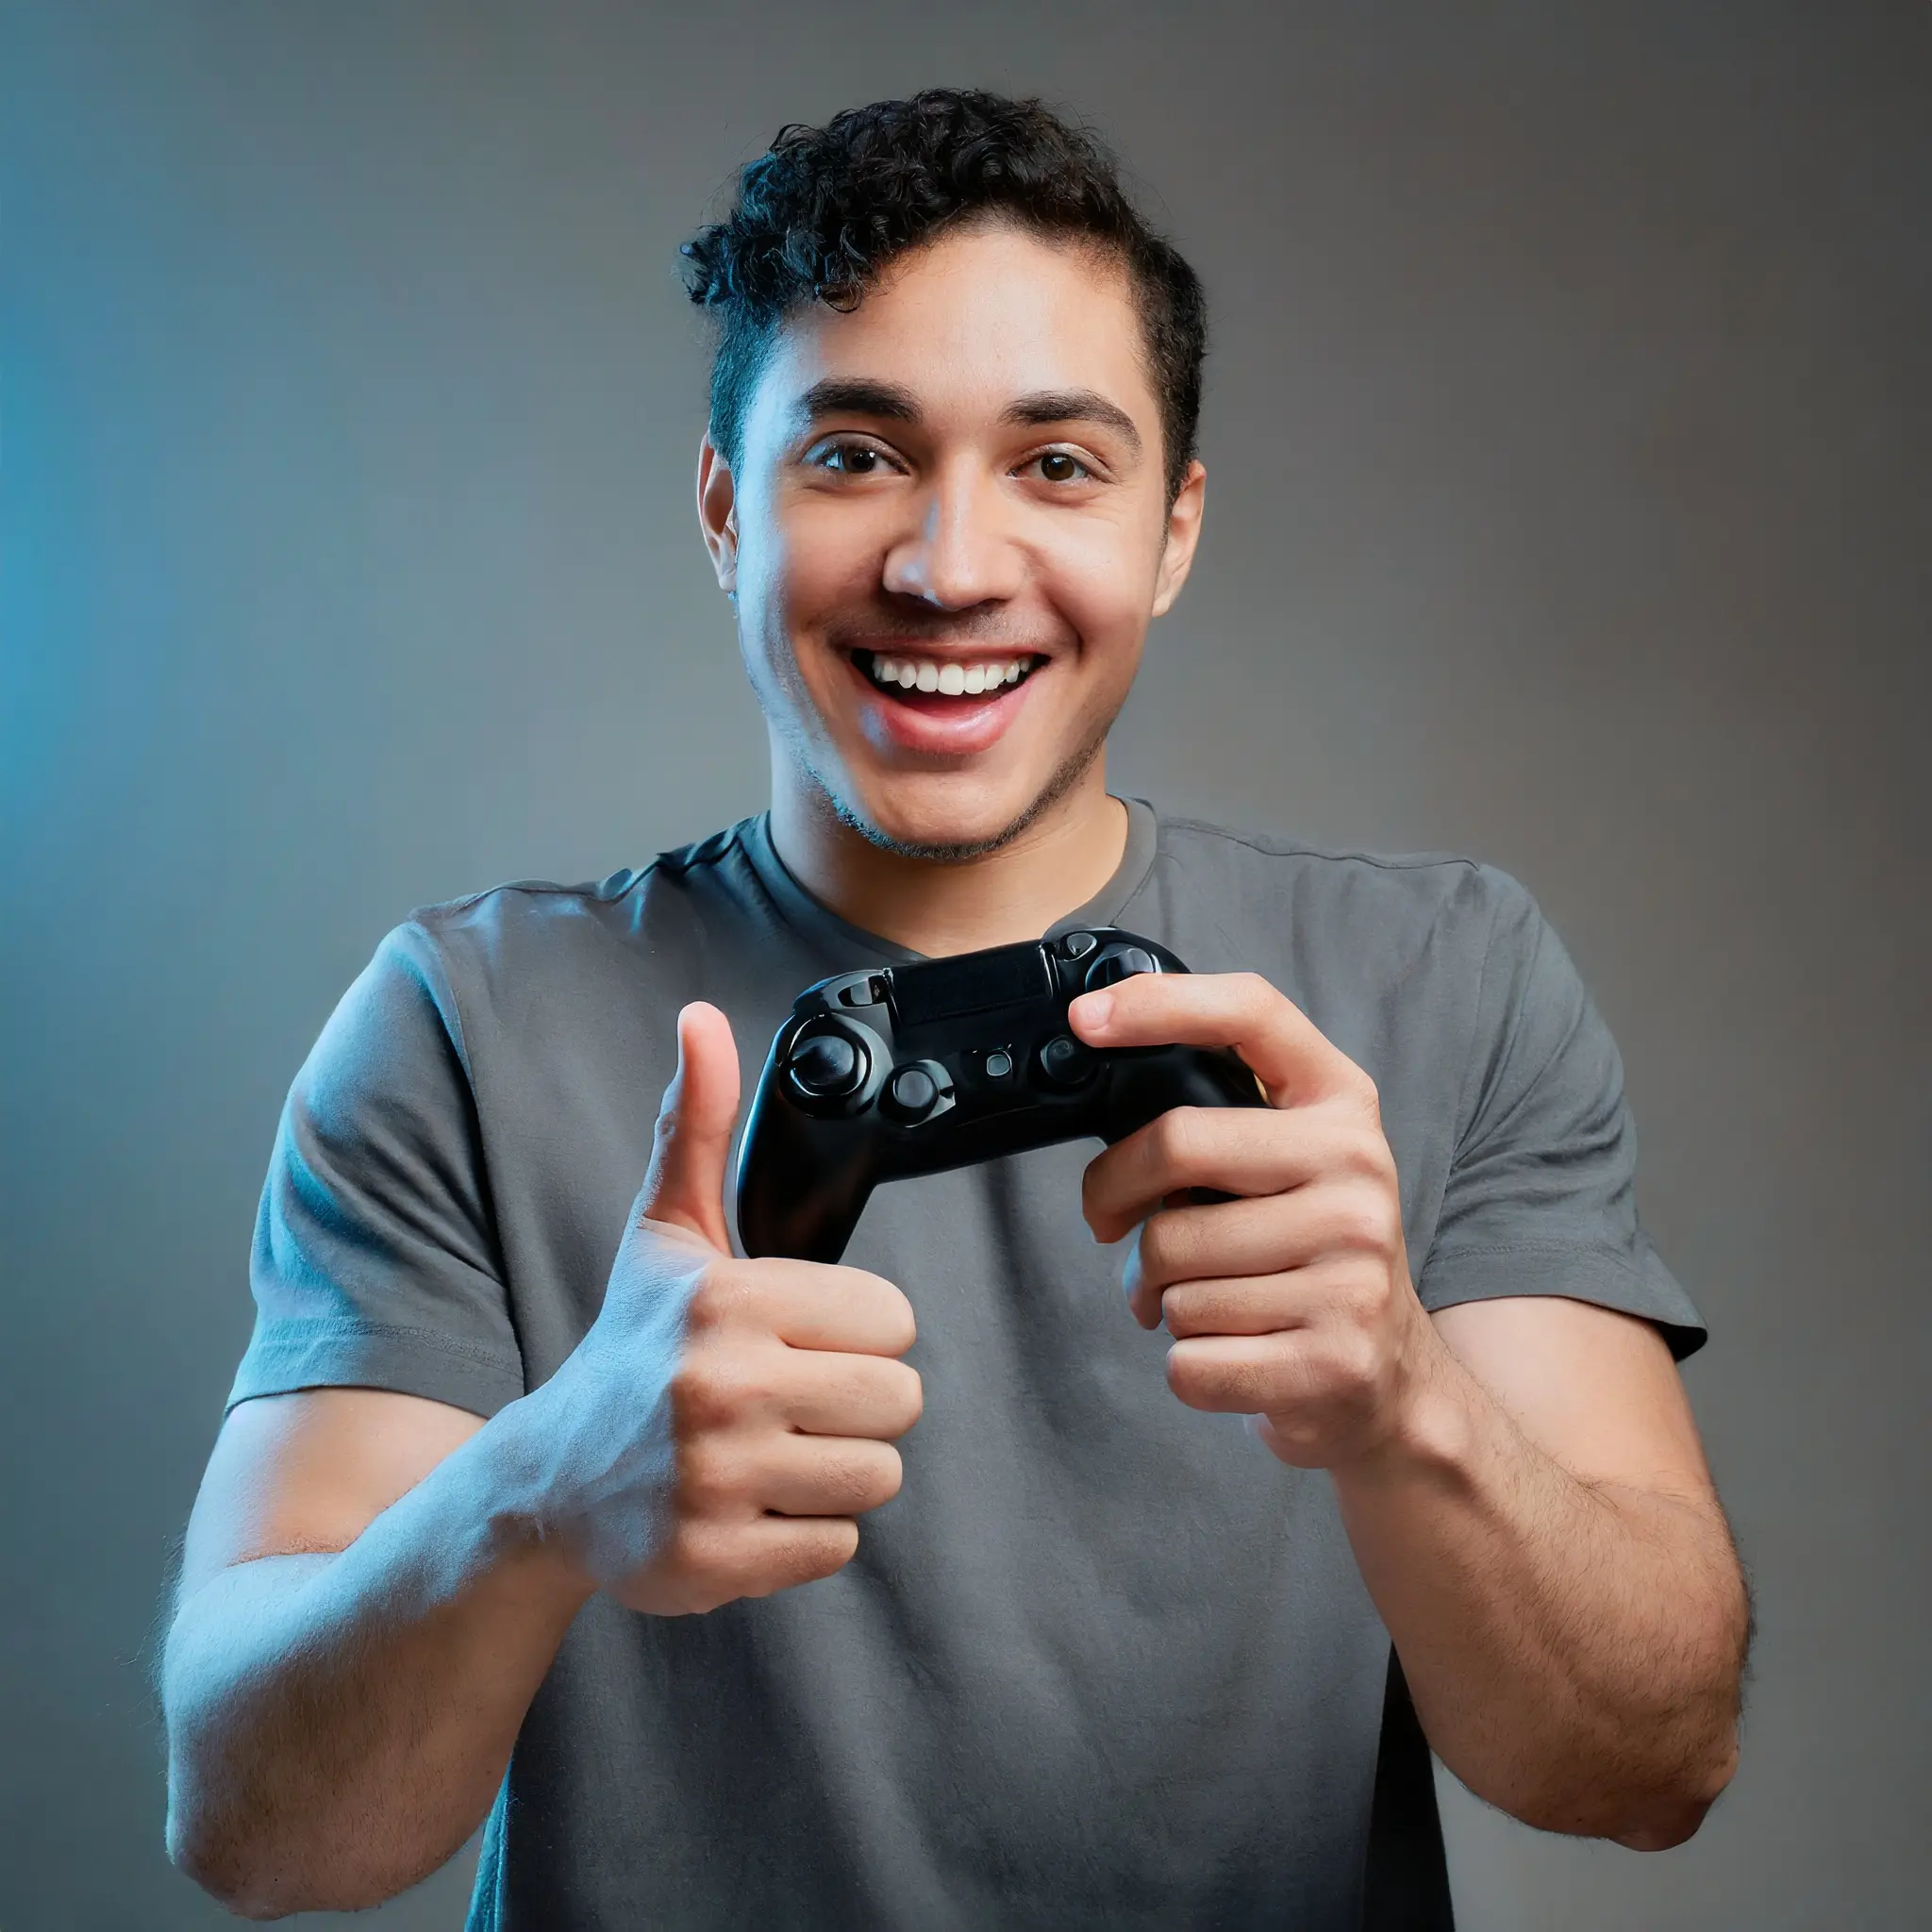 A happy gamer giving a thumbs-up while holding a PS5 controller, expressing satisfaction and confidence in their gaming experience.